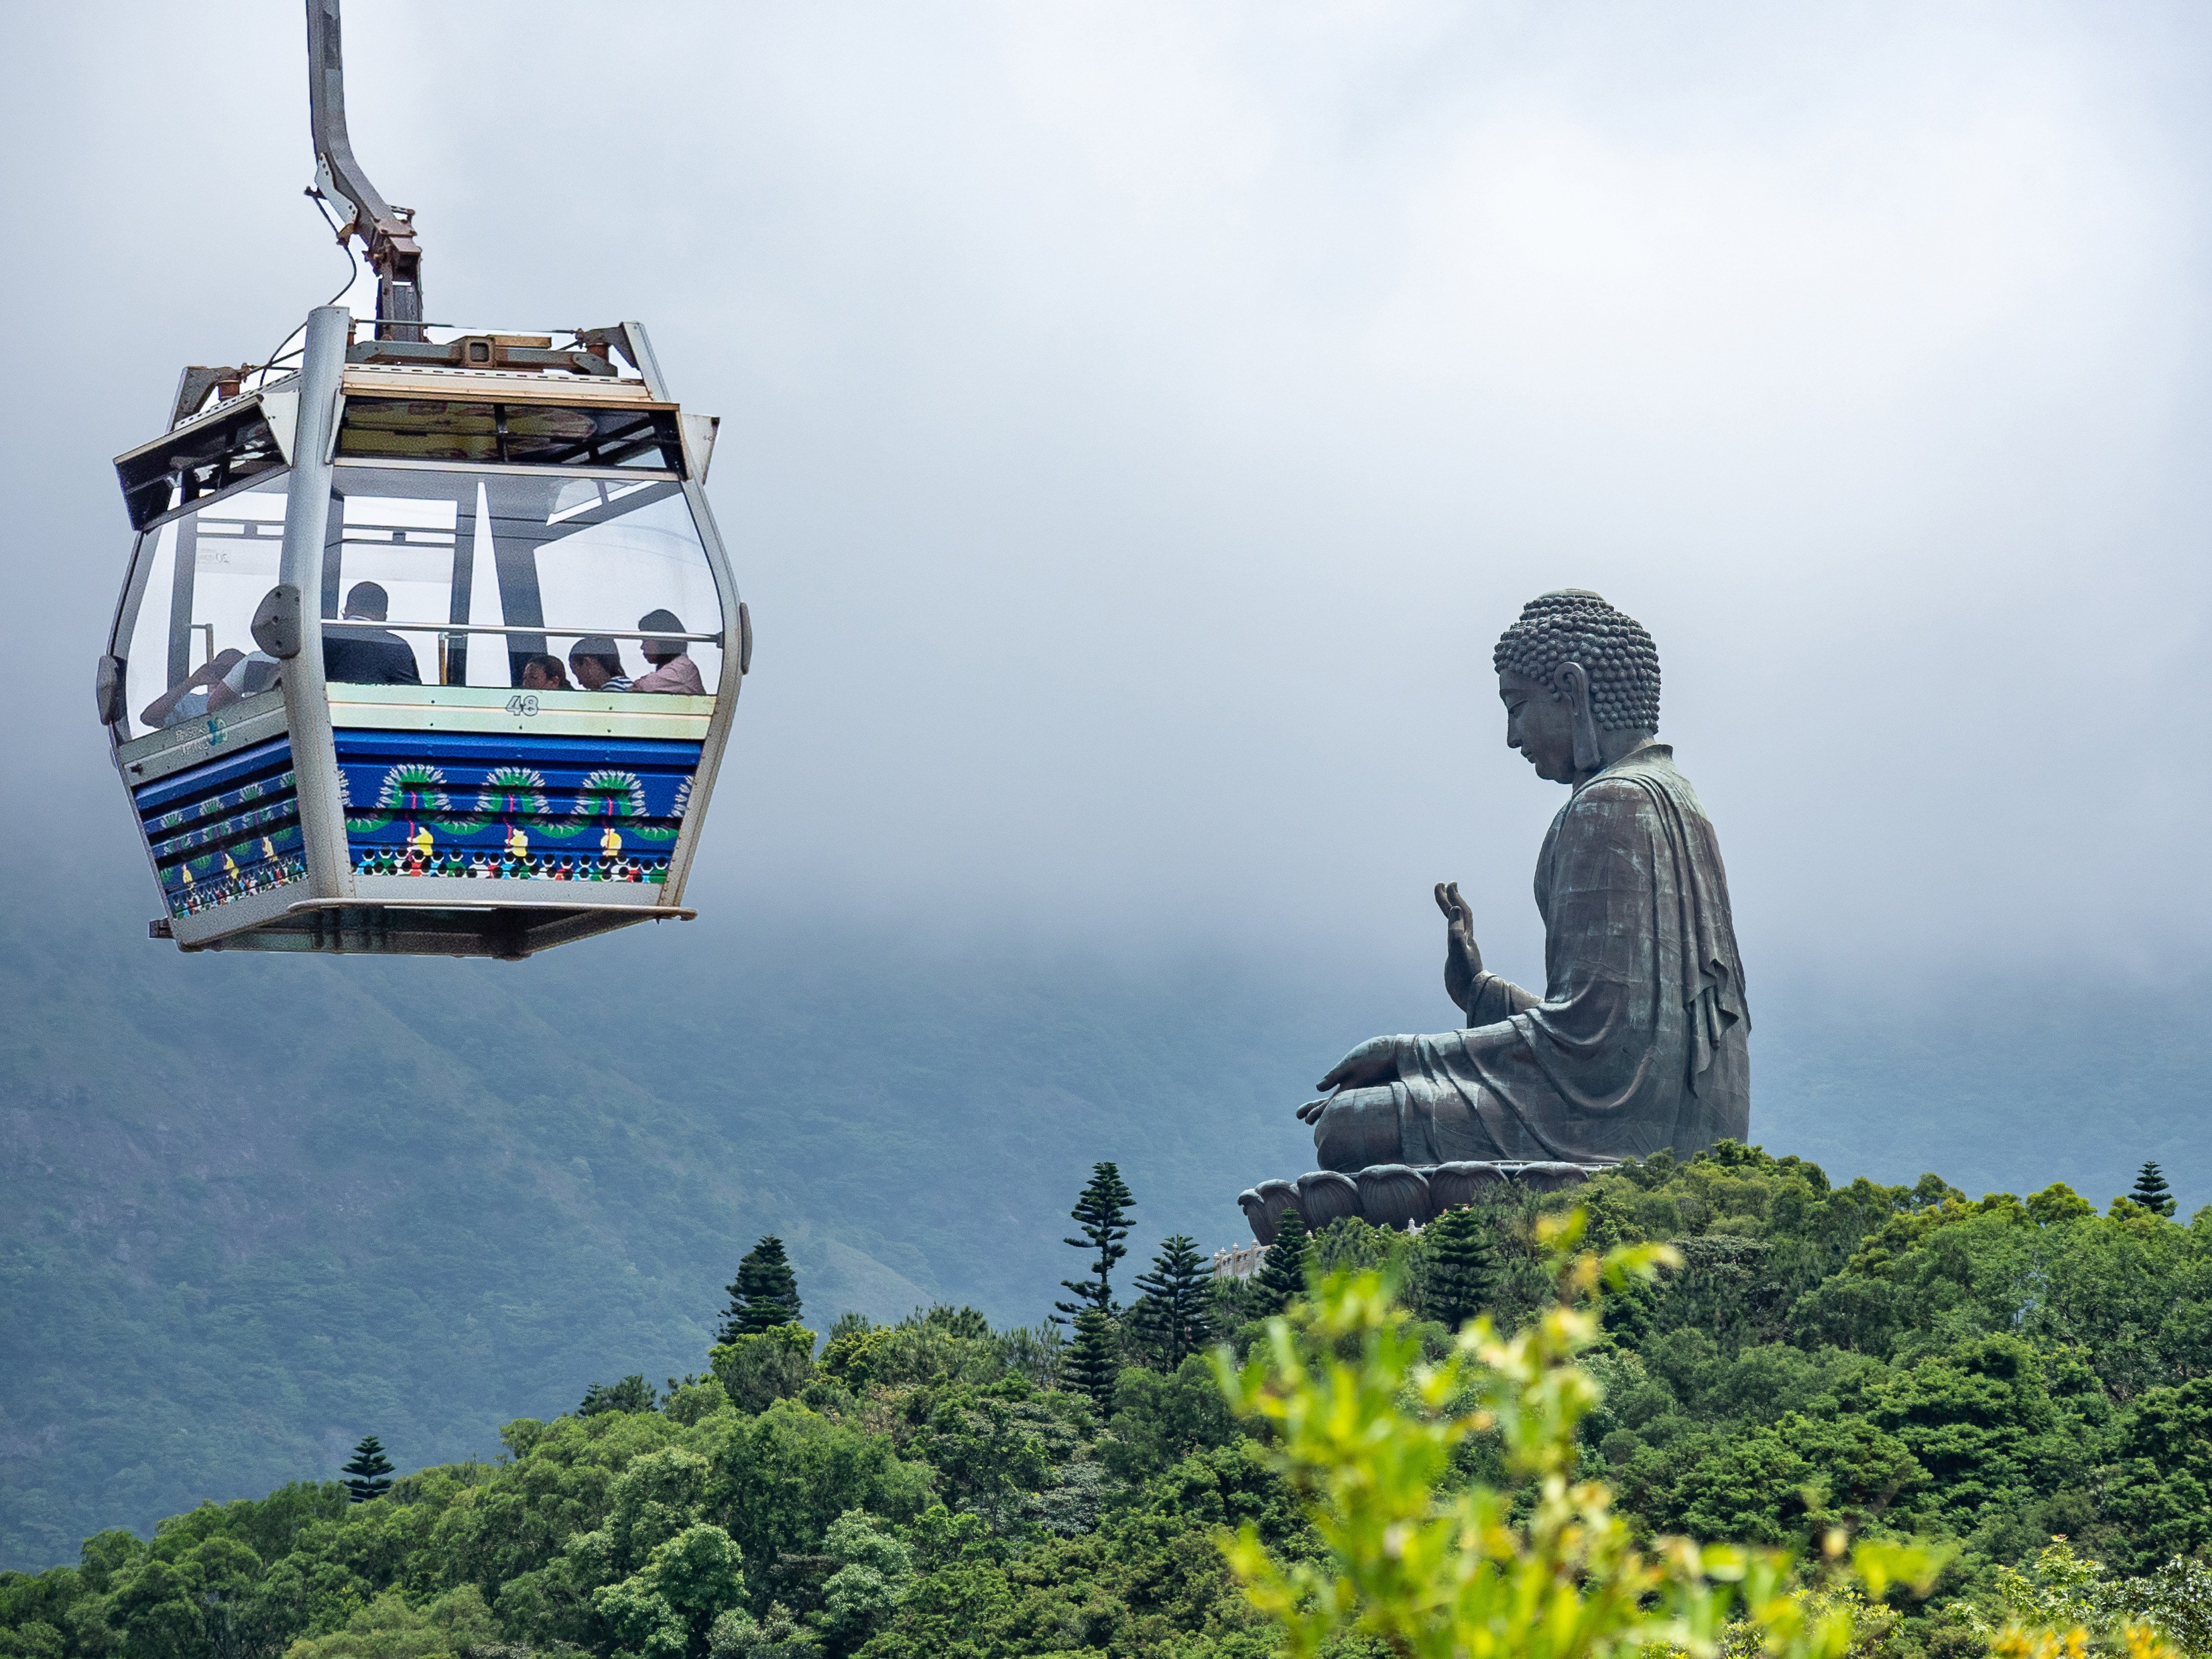 A Ngong Ping 360 cable car approaches the site of the city’s famous “Big Buddha” statue. Photo: Shutterstock